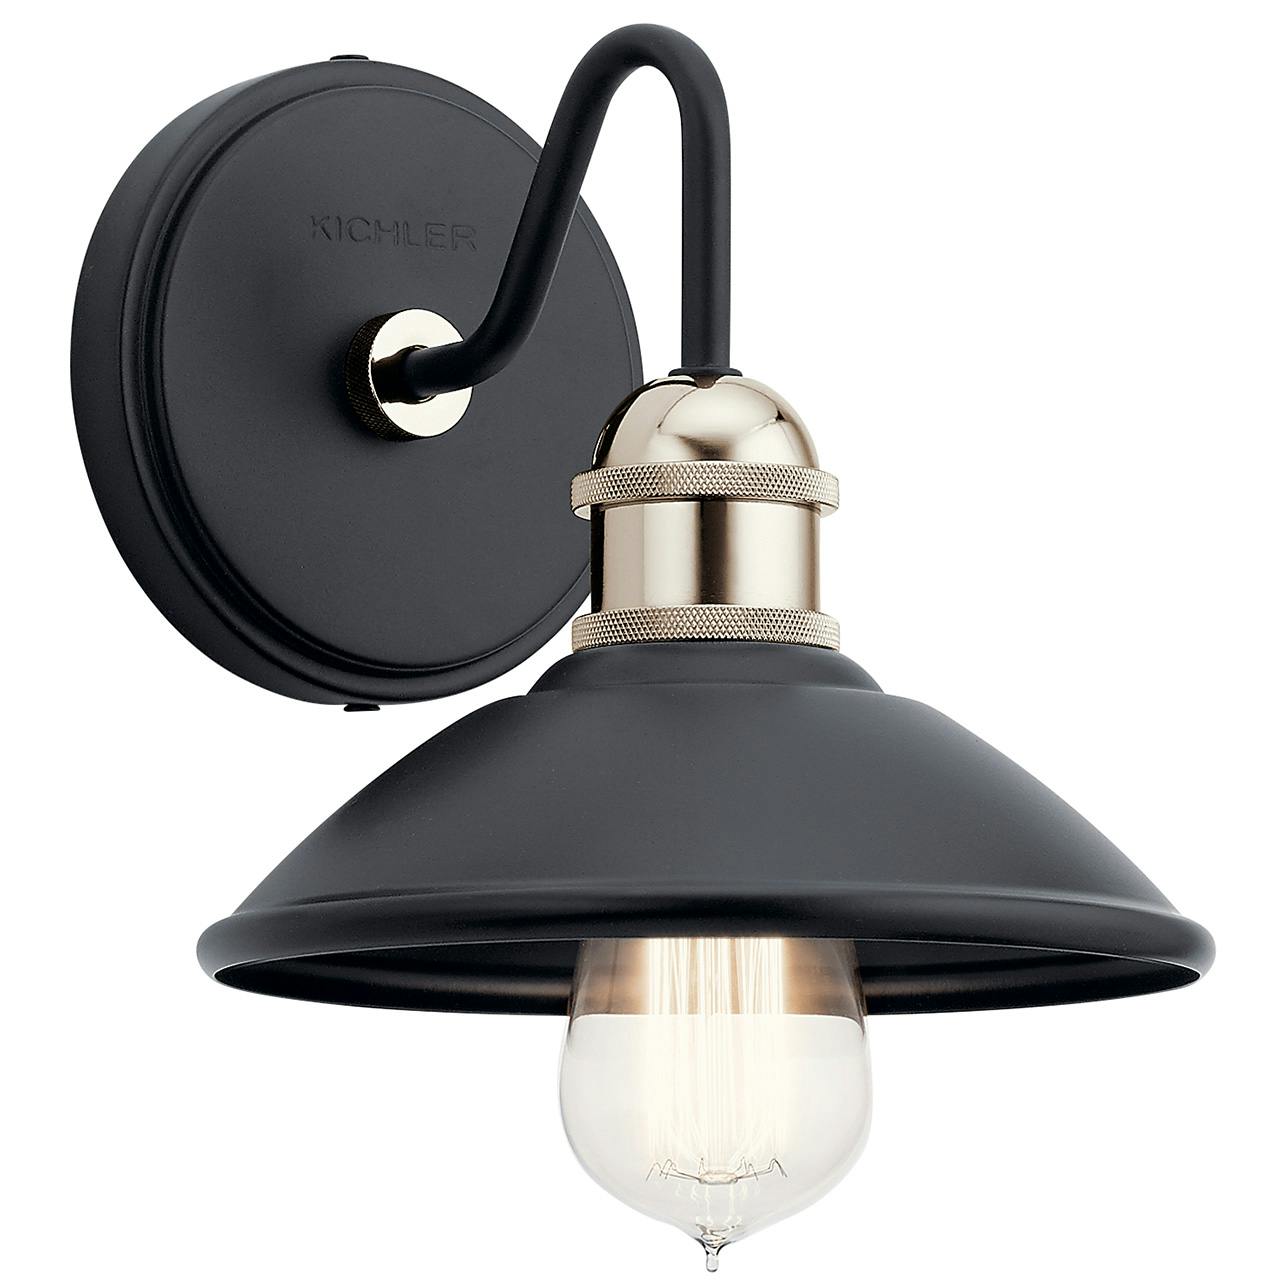 Clyde 1 Light Wall Sconce Black on a white background